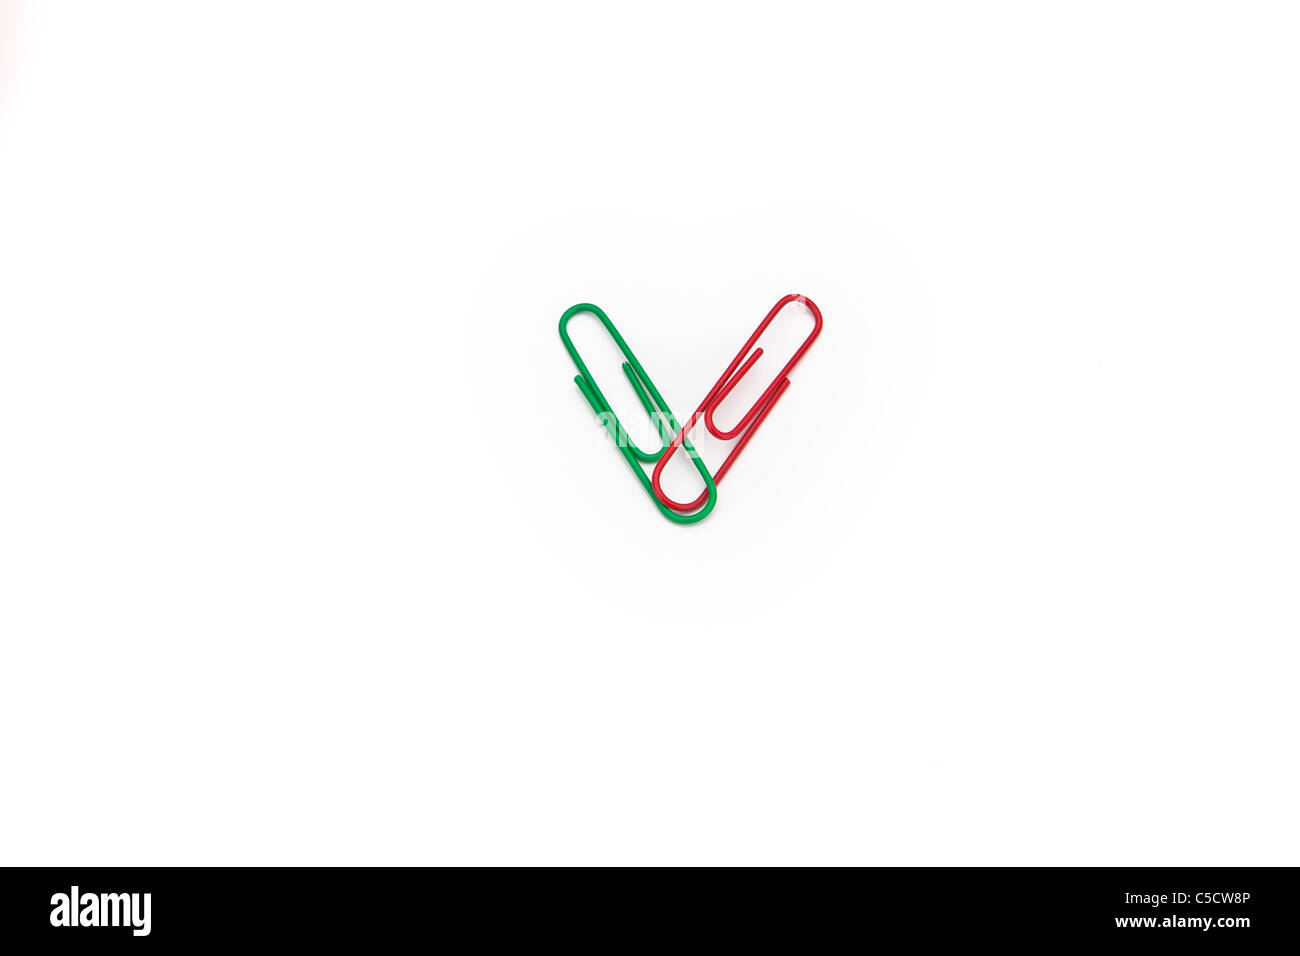 two paper clips in the colors green and red on white background Stock Photo